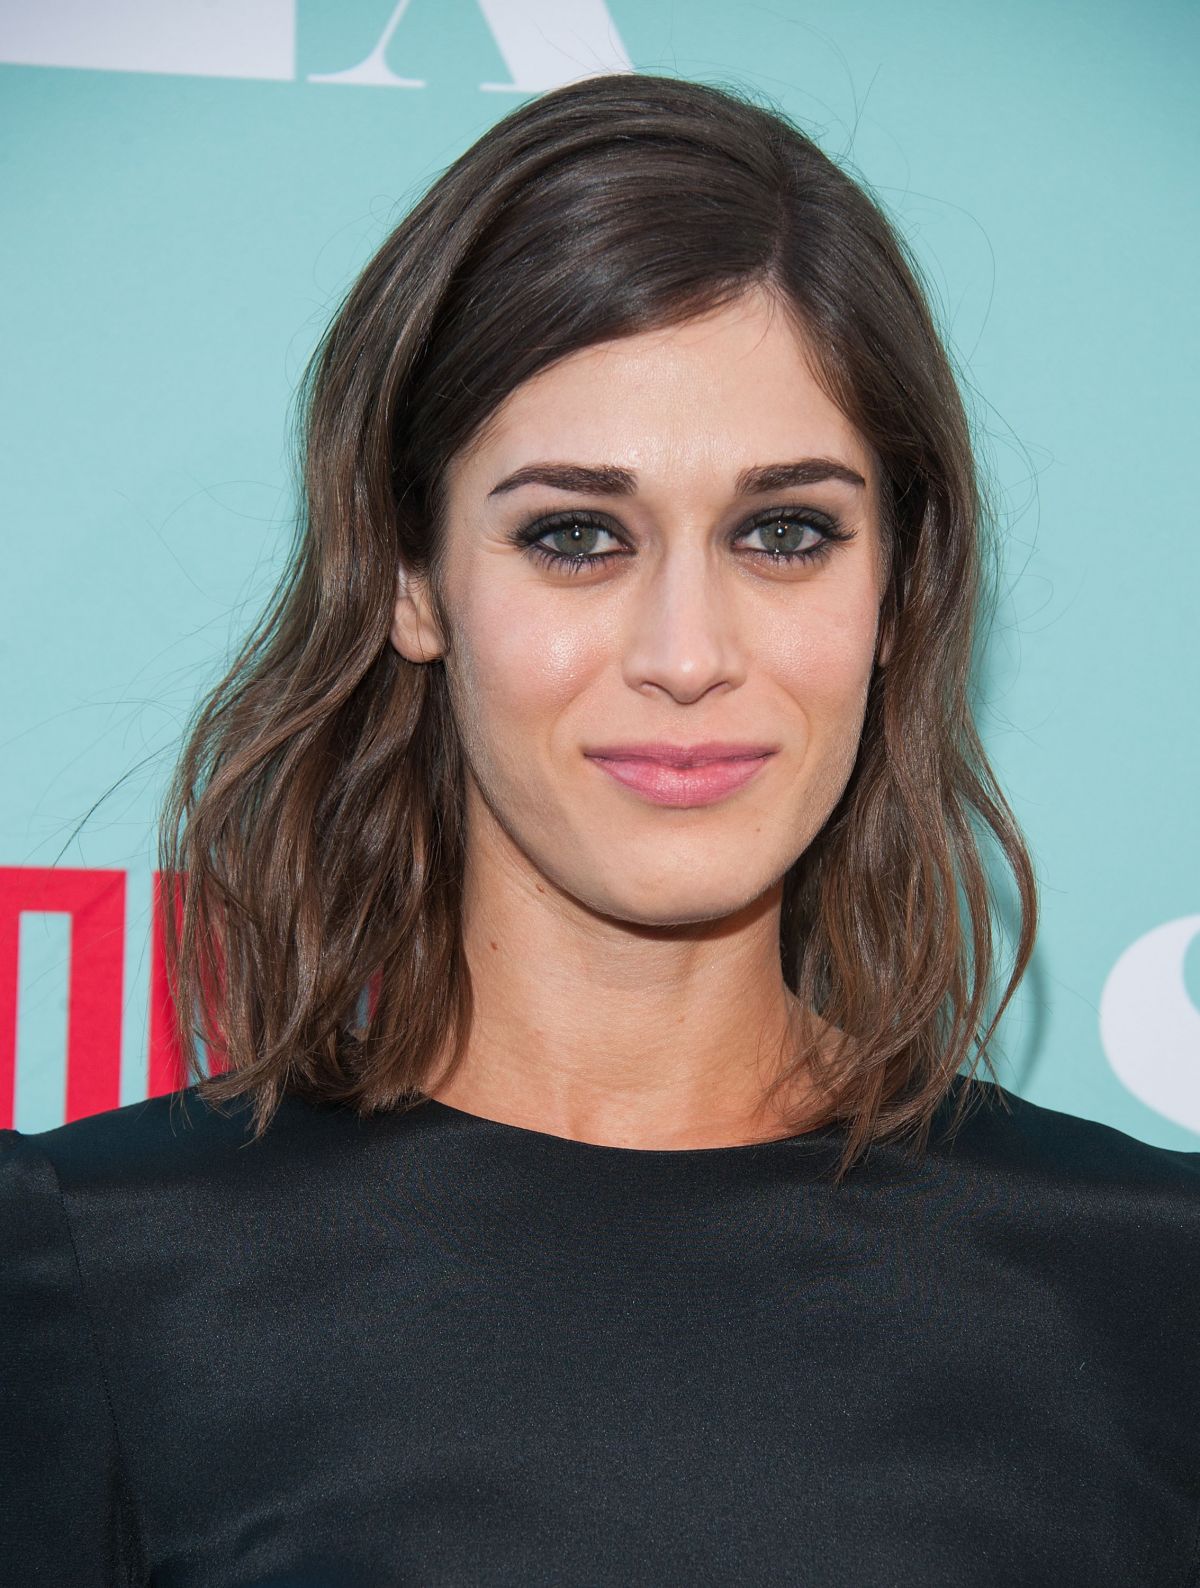 Lizzy Caplan Now You See Me 2 Wallpapers | HD Wallpapers | ID #16852